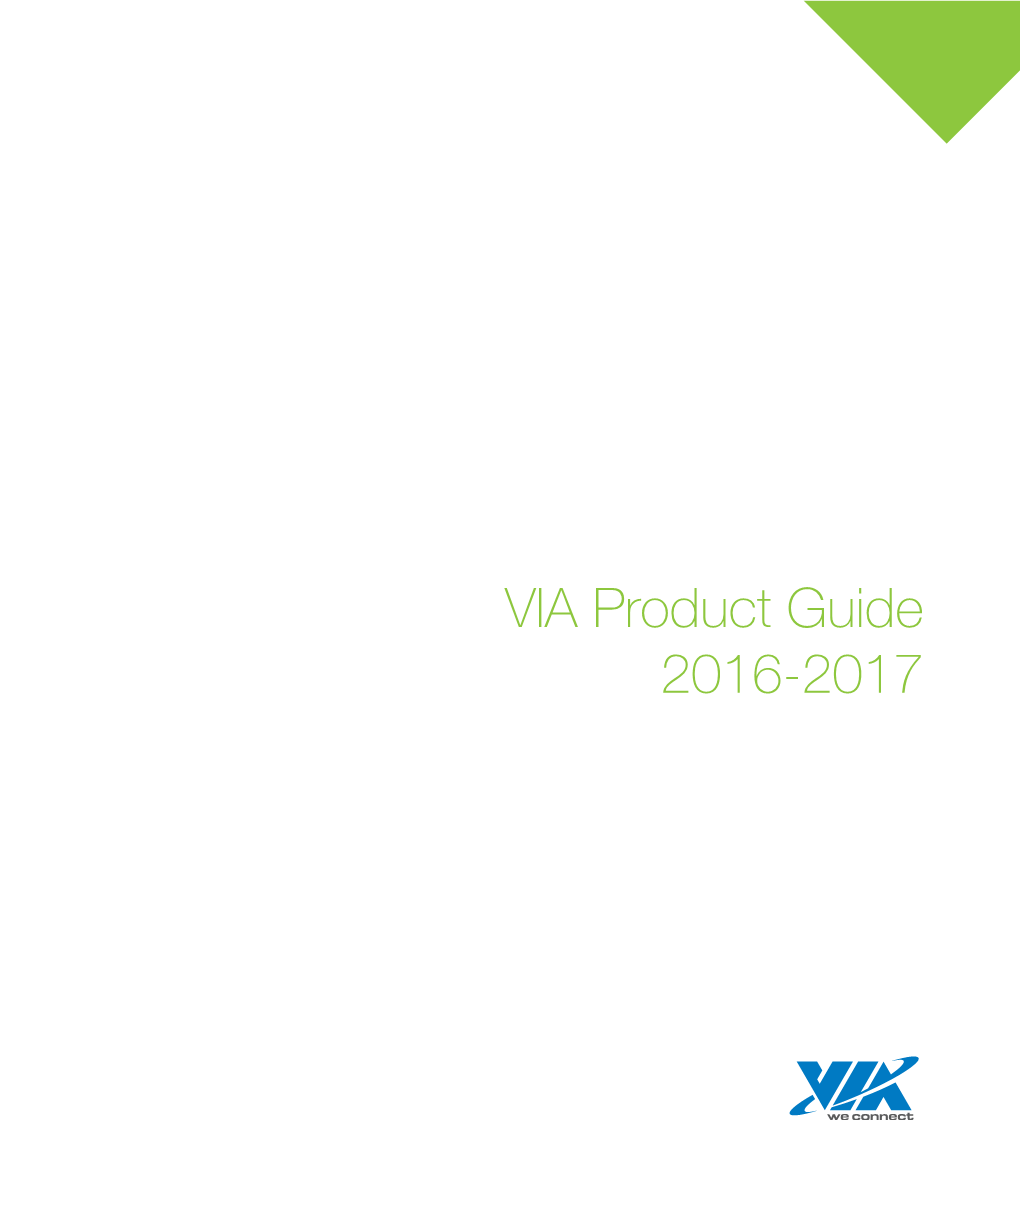 VIA Product Guide 2016-2017 Table of Contents